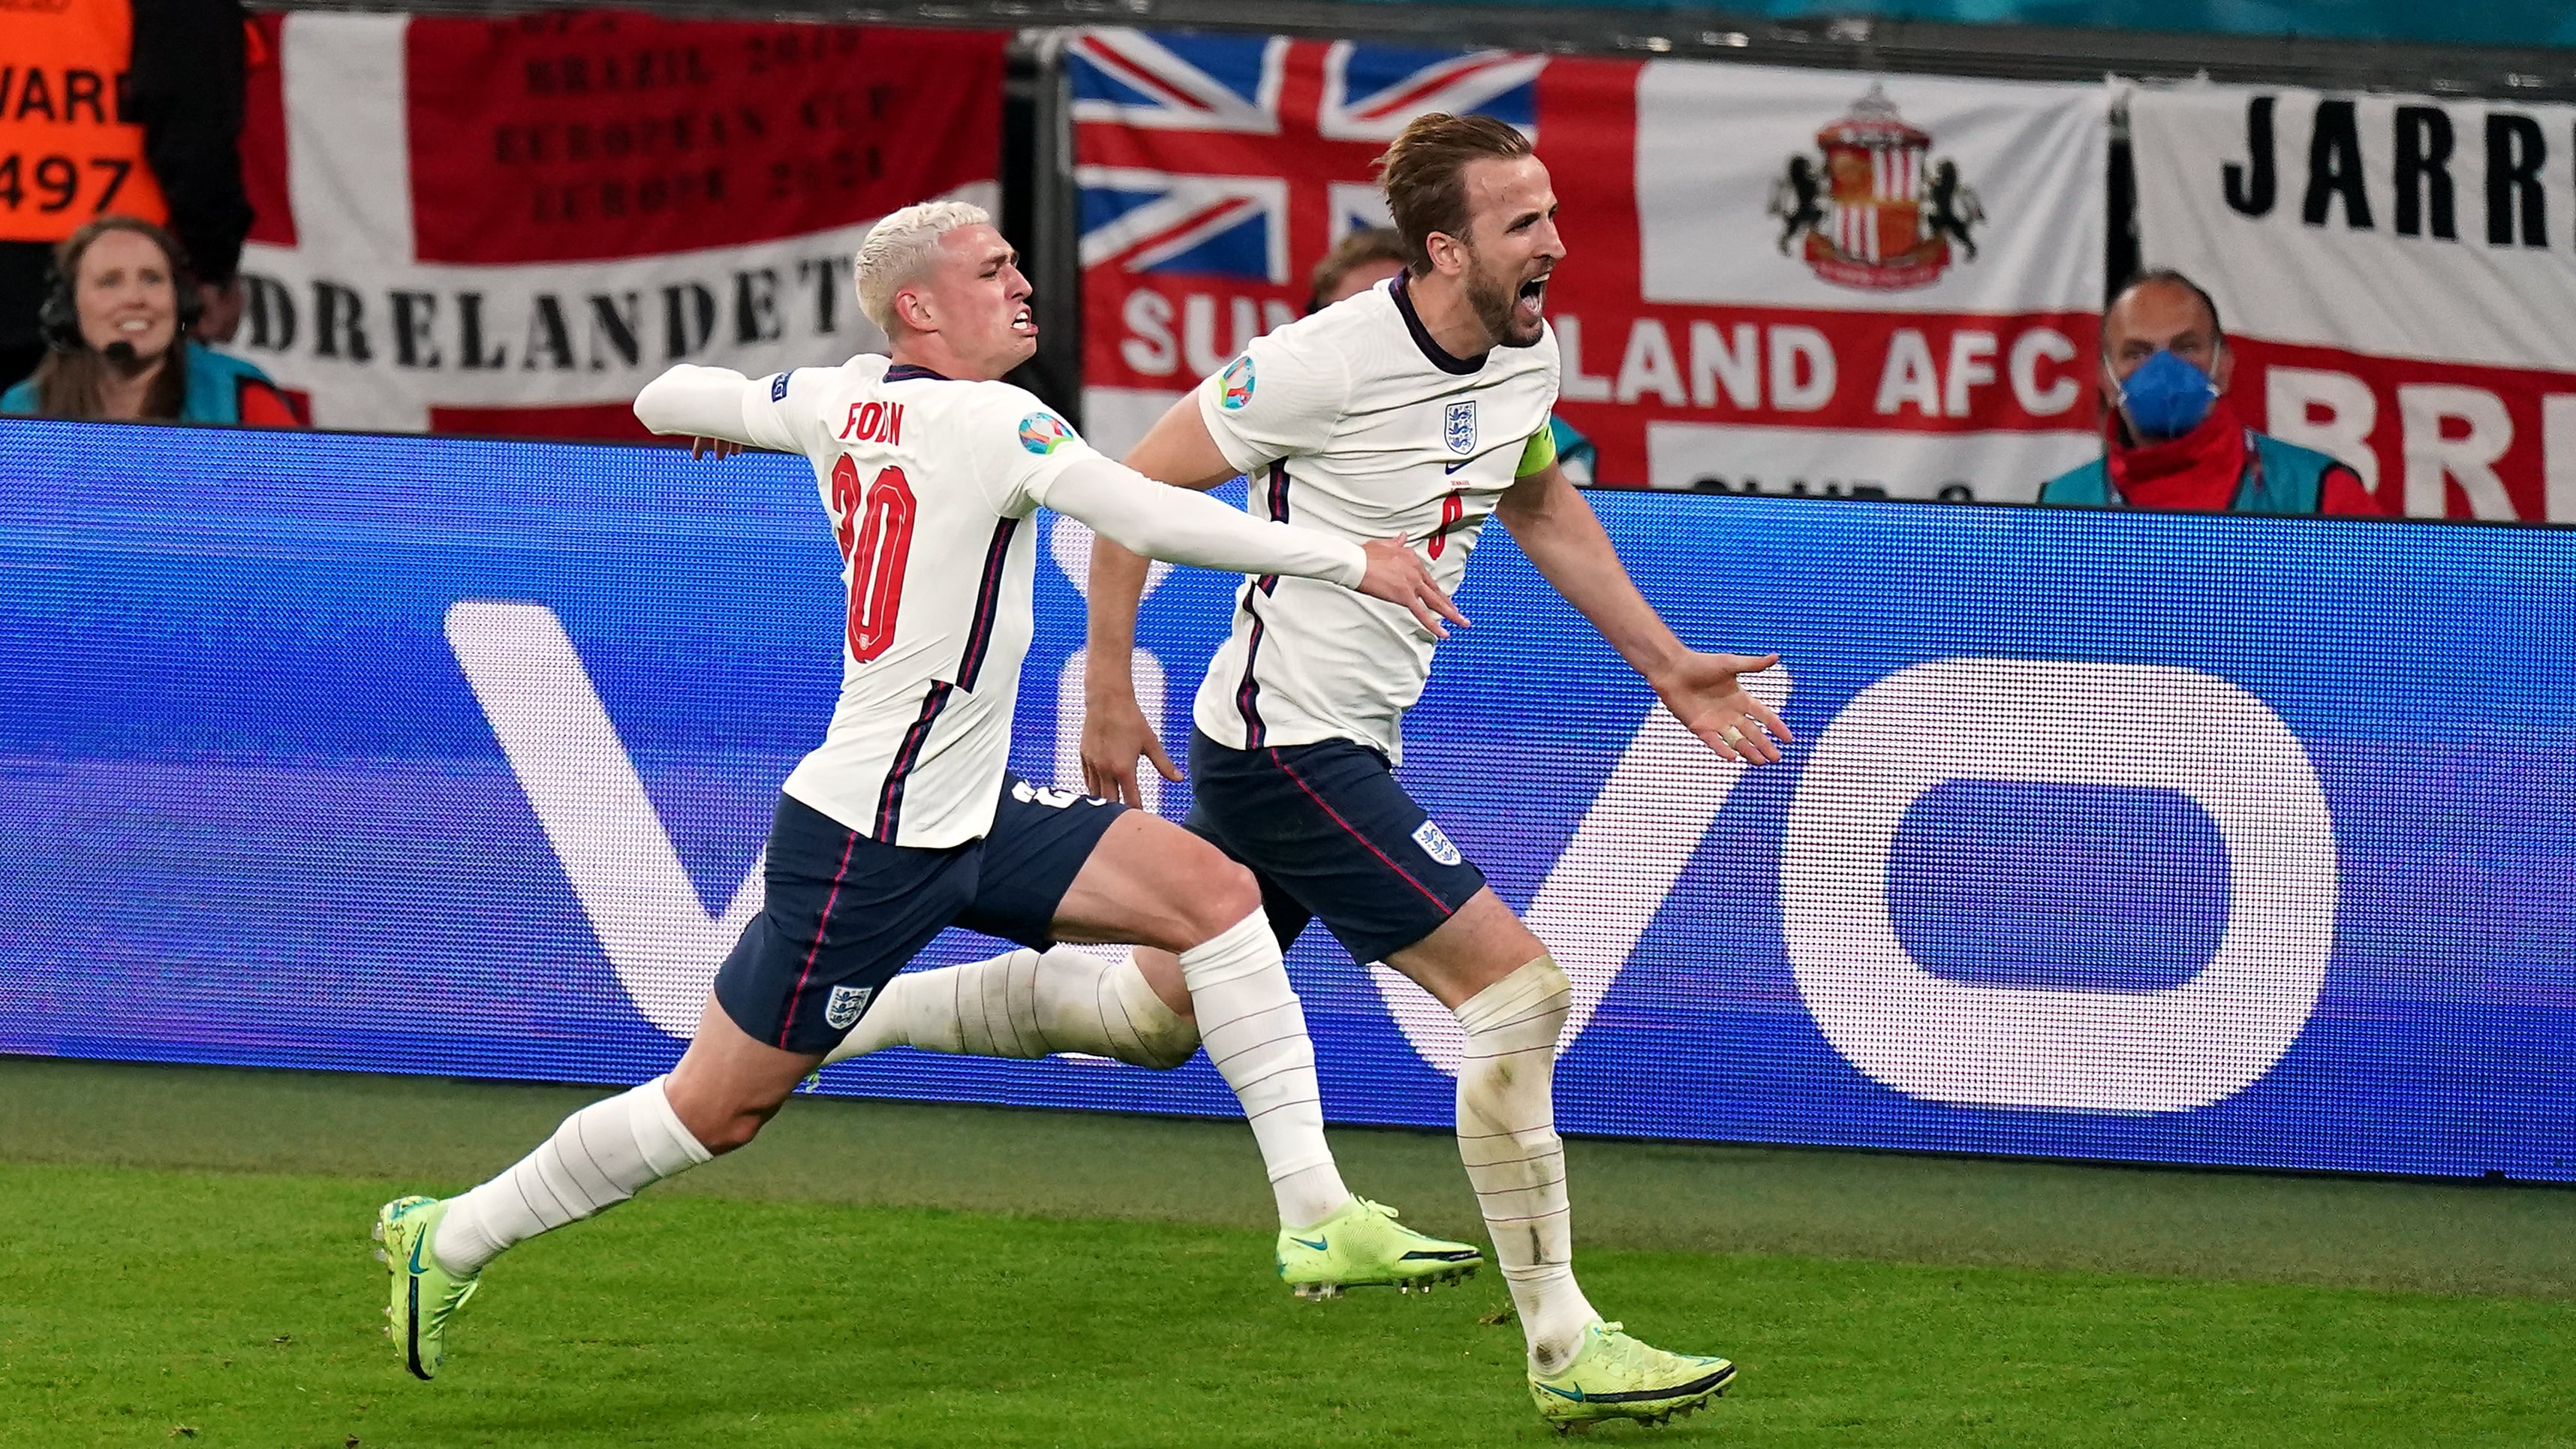 Harry Kane scored a memorable goal for England in the Euro 2020 semi-final